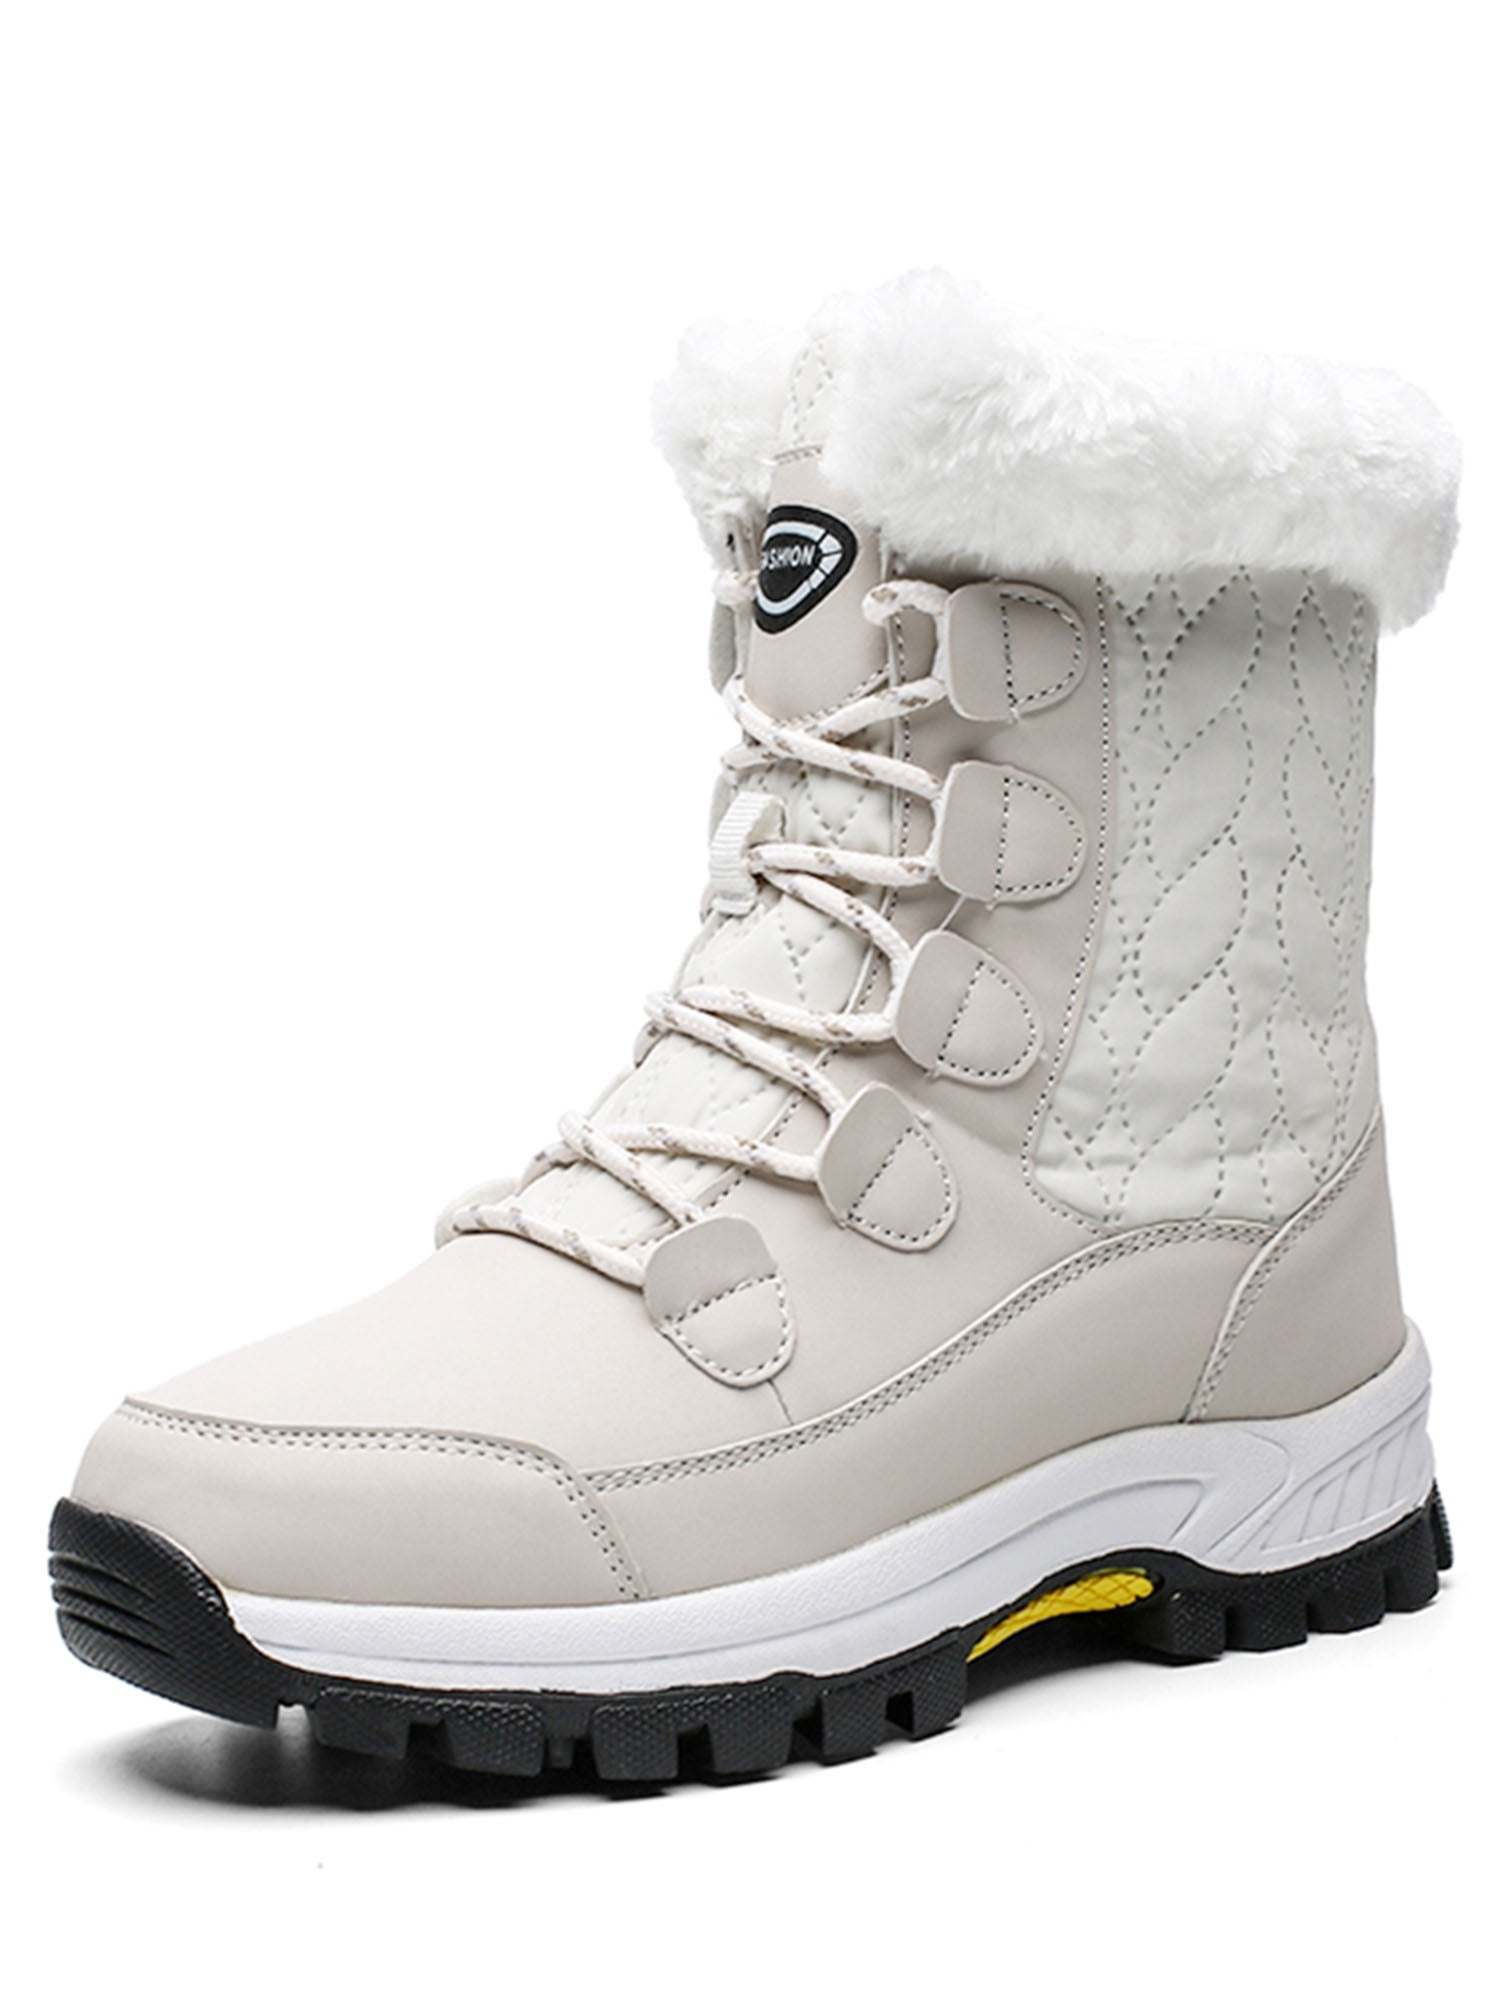 Womens Winter Boots Waterproof and Non-Slip Snow Boots for Women Warm and Cold-Resistant Furry Collar Outdoor Snow Boots Rain Boots，Rubber Outsole Mid Calf Winter Walking Boots